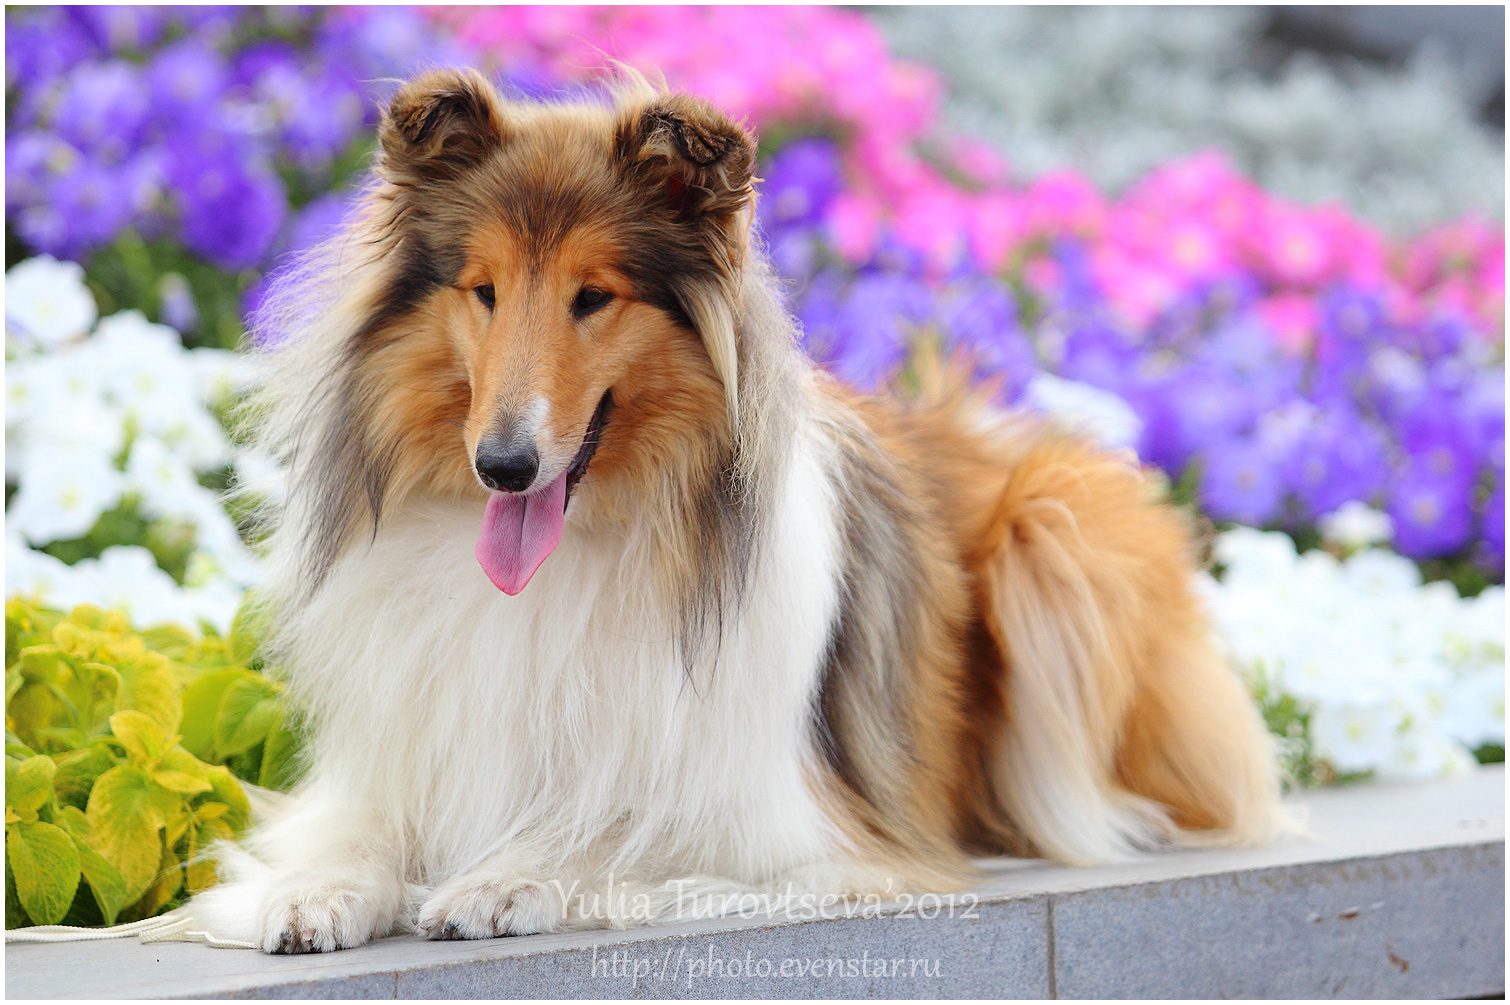 Collie, Rough Dog: Collie, Collie Rough Dog In Flowers Pic Breed